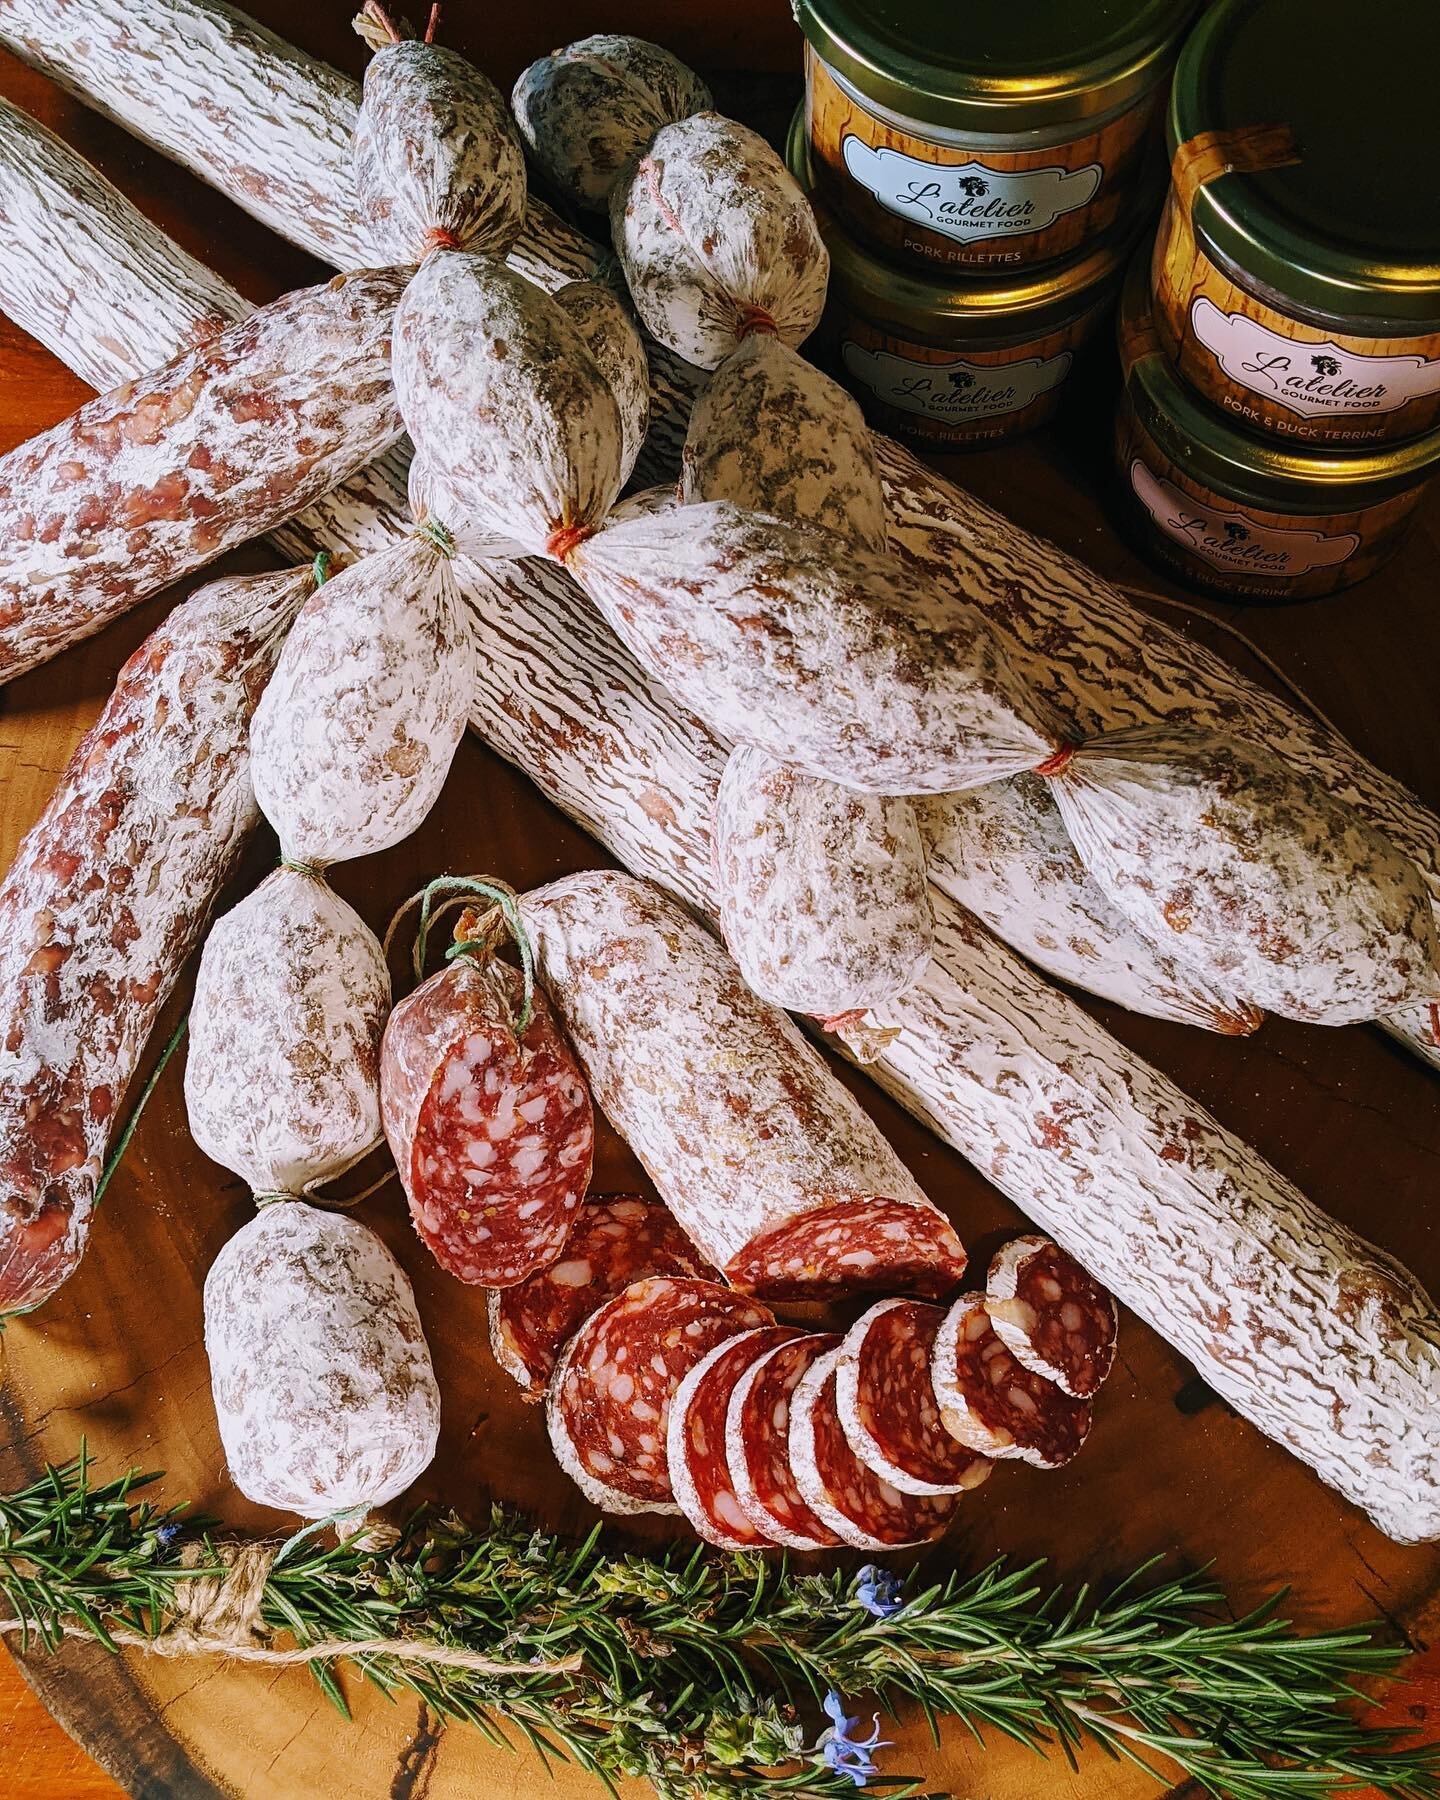 By popular demand, we now offer an awesome selection of Australian charcuterie goodies! The perfect addition to any cheese board 🧀🥖🥓

&bull; Salami (Mild, Hot, Fennel and Wine-Infused)
&bull; Terrine
&bull; P&acirc;t&egrave;
&bull; Pork Pies
&bull